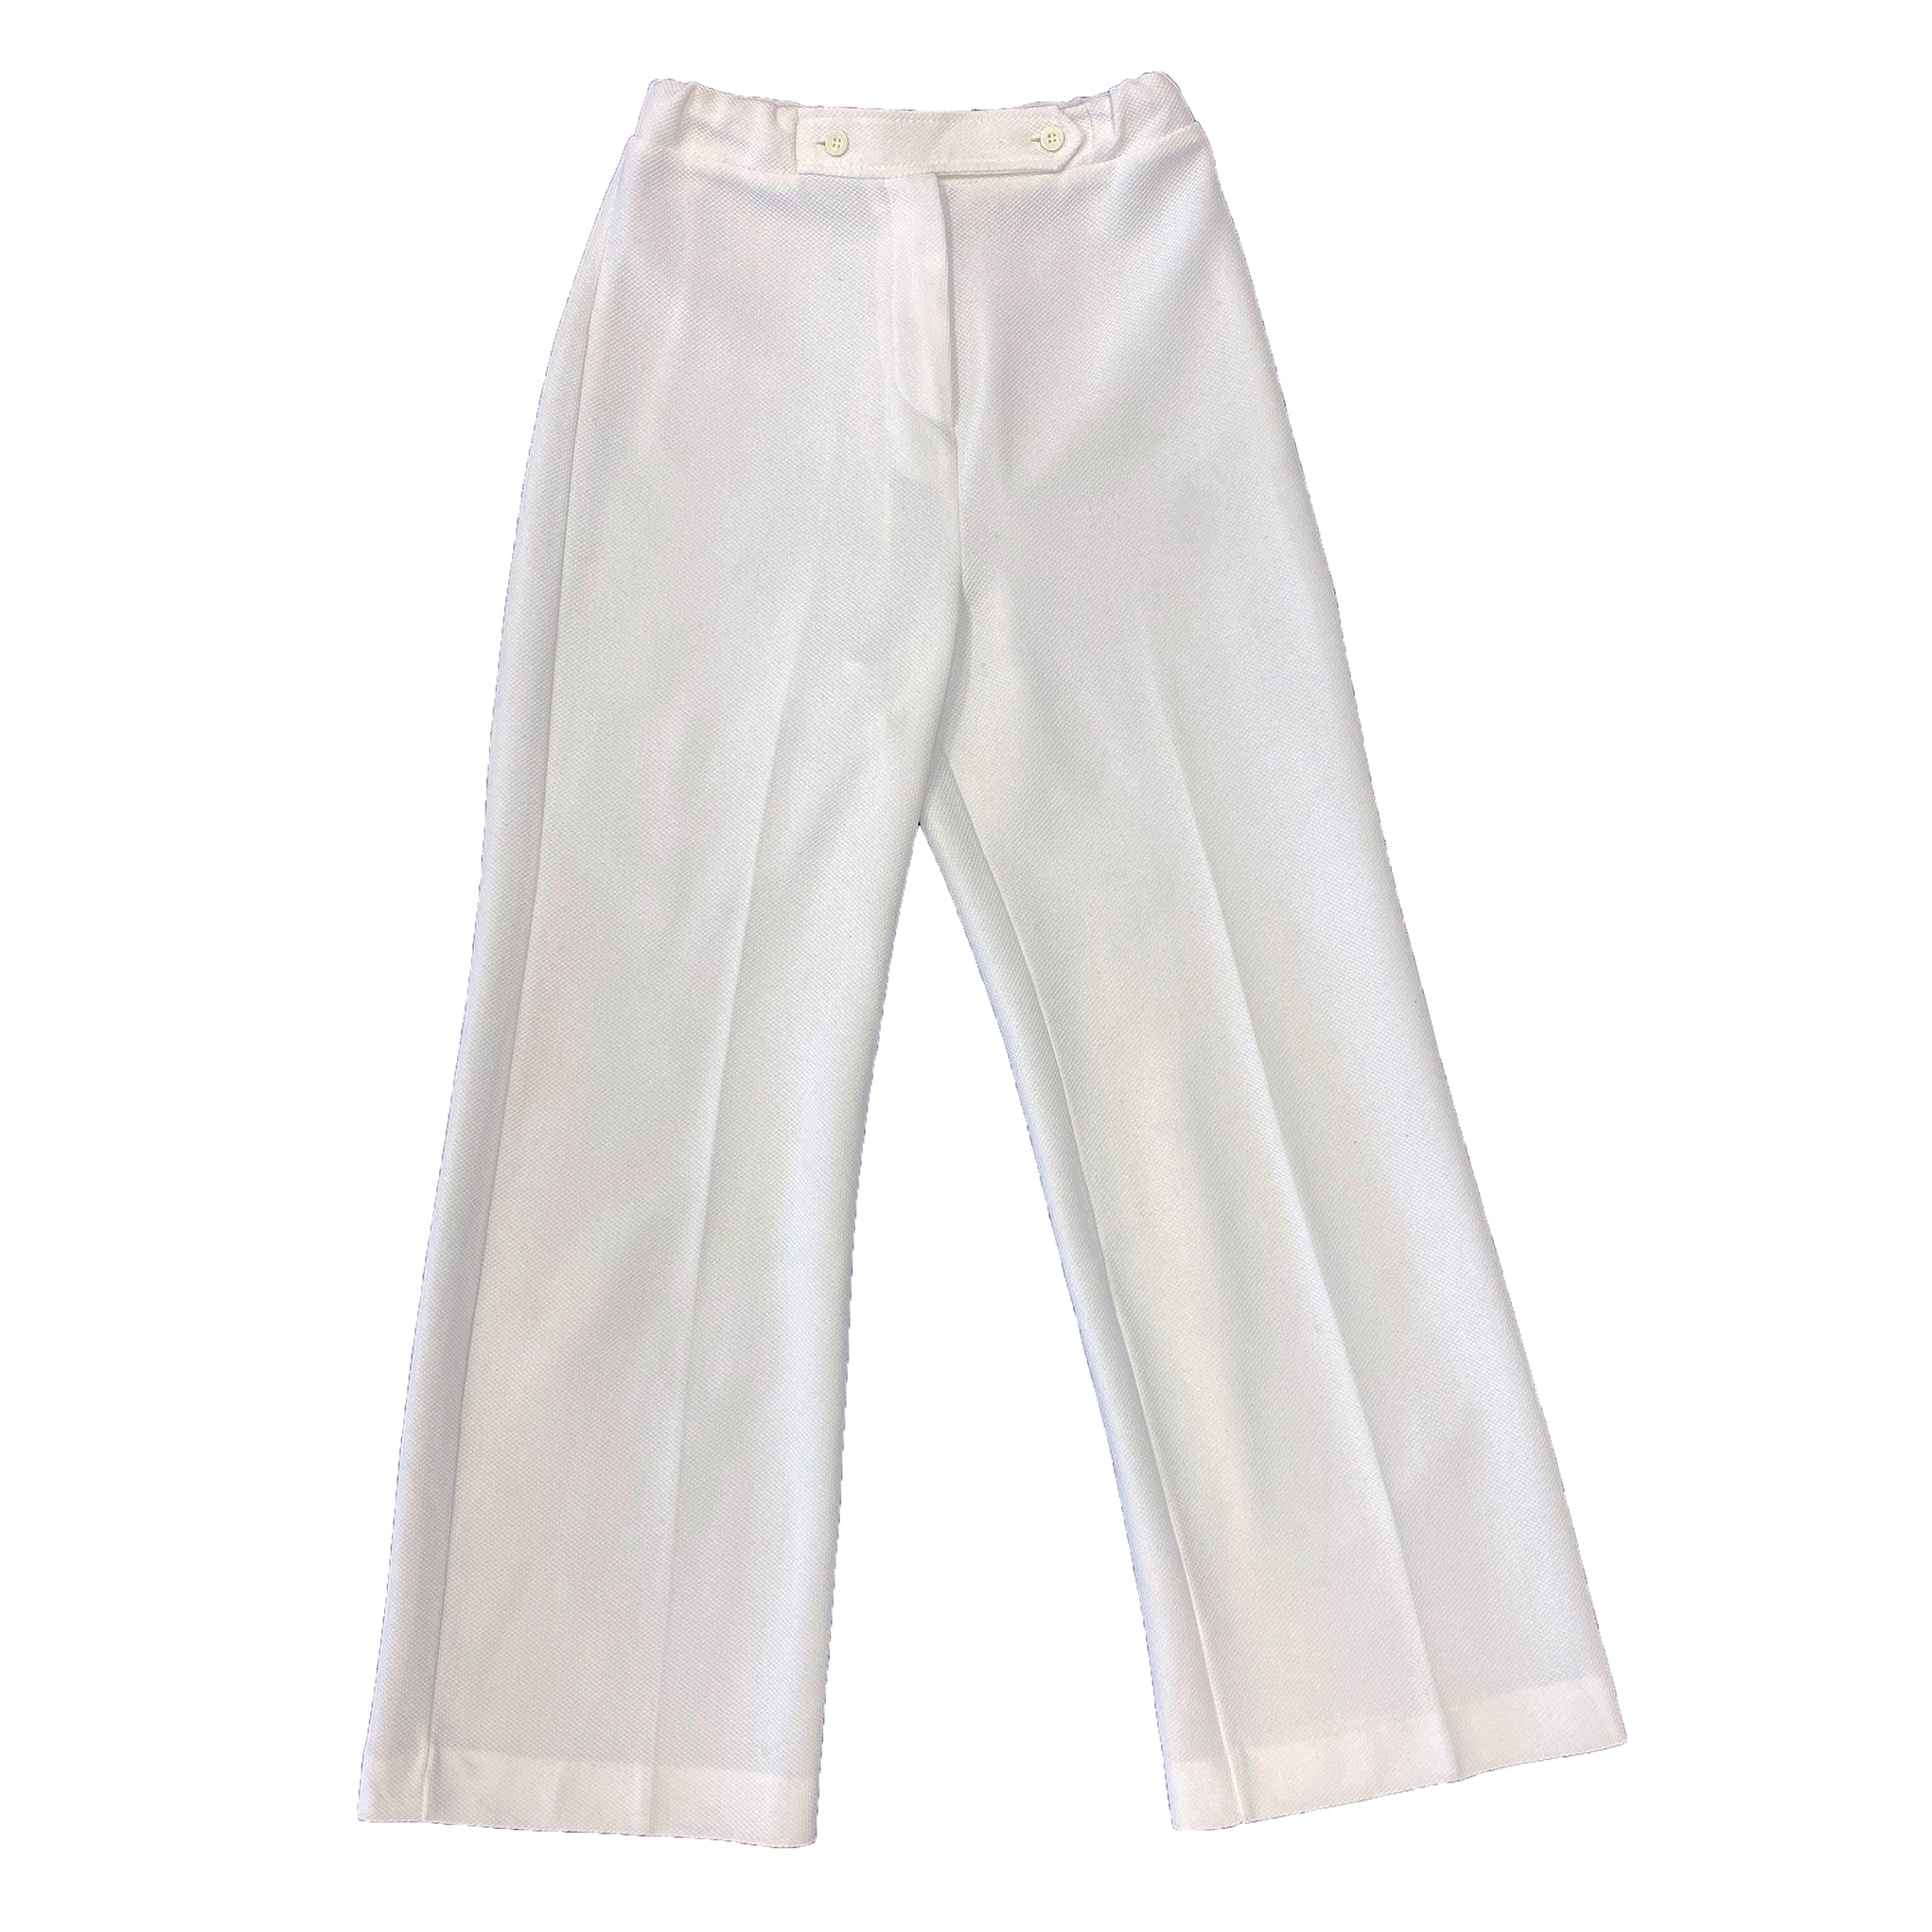 White Wide-leg High-waisted Trousers